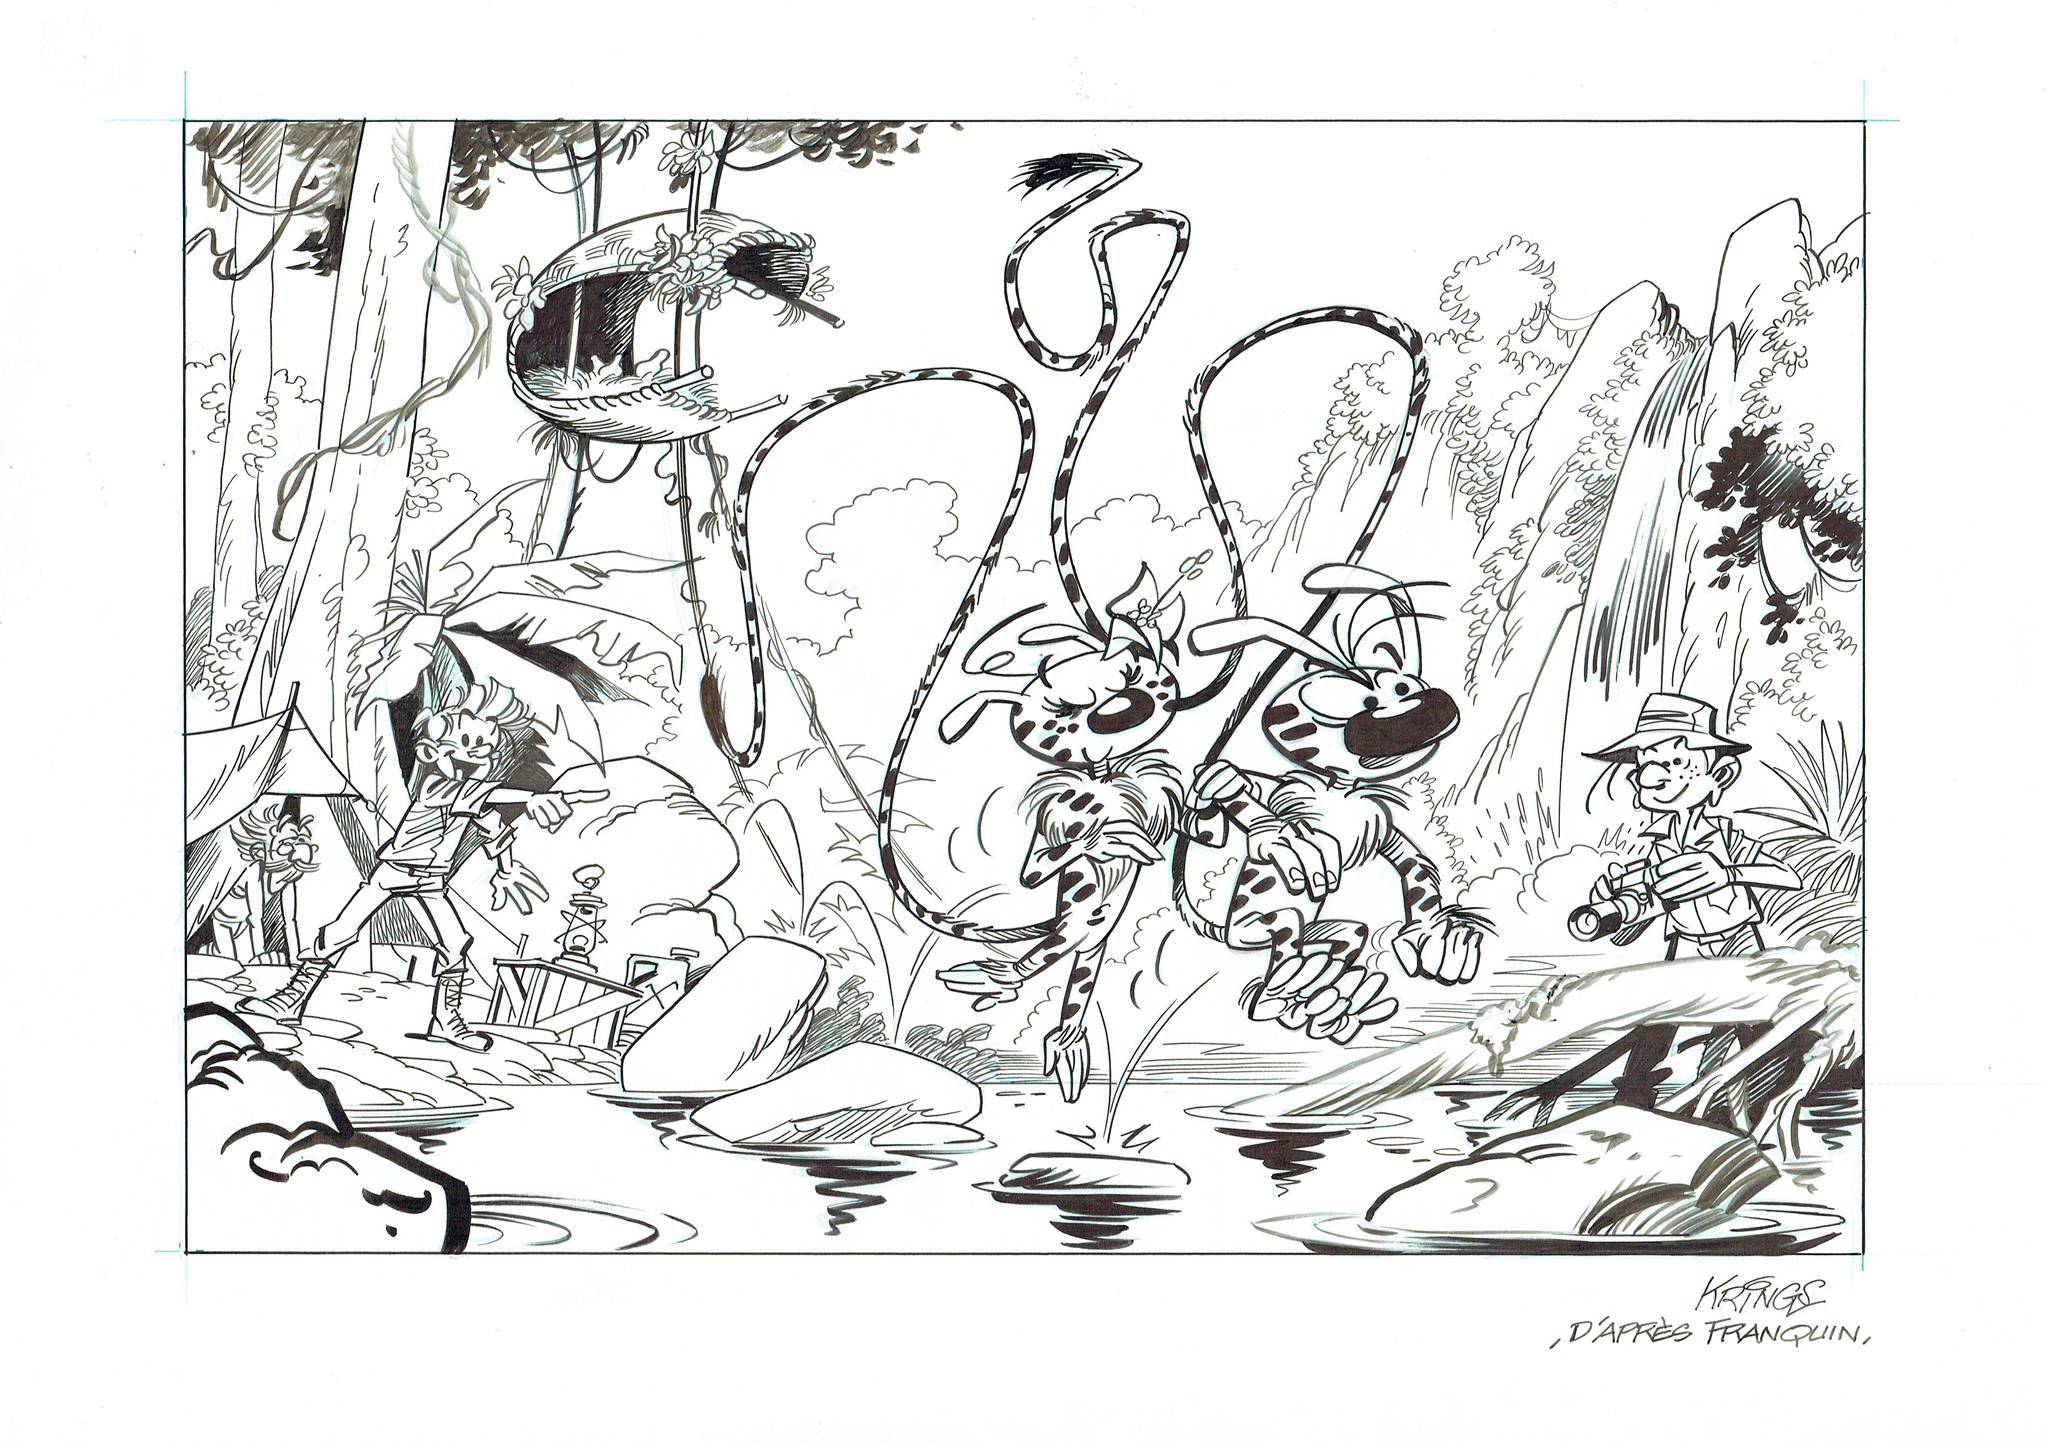 Palombian Expedition (ill. Jean-Marc Krings after Franquin; Copyright (c) 2016 the artist; Spirou (c) Dupuis, Marsupilami (c) Marsu Productions; image from facebook.com)